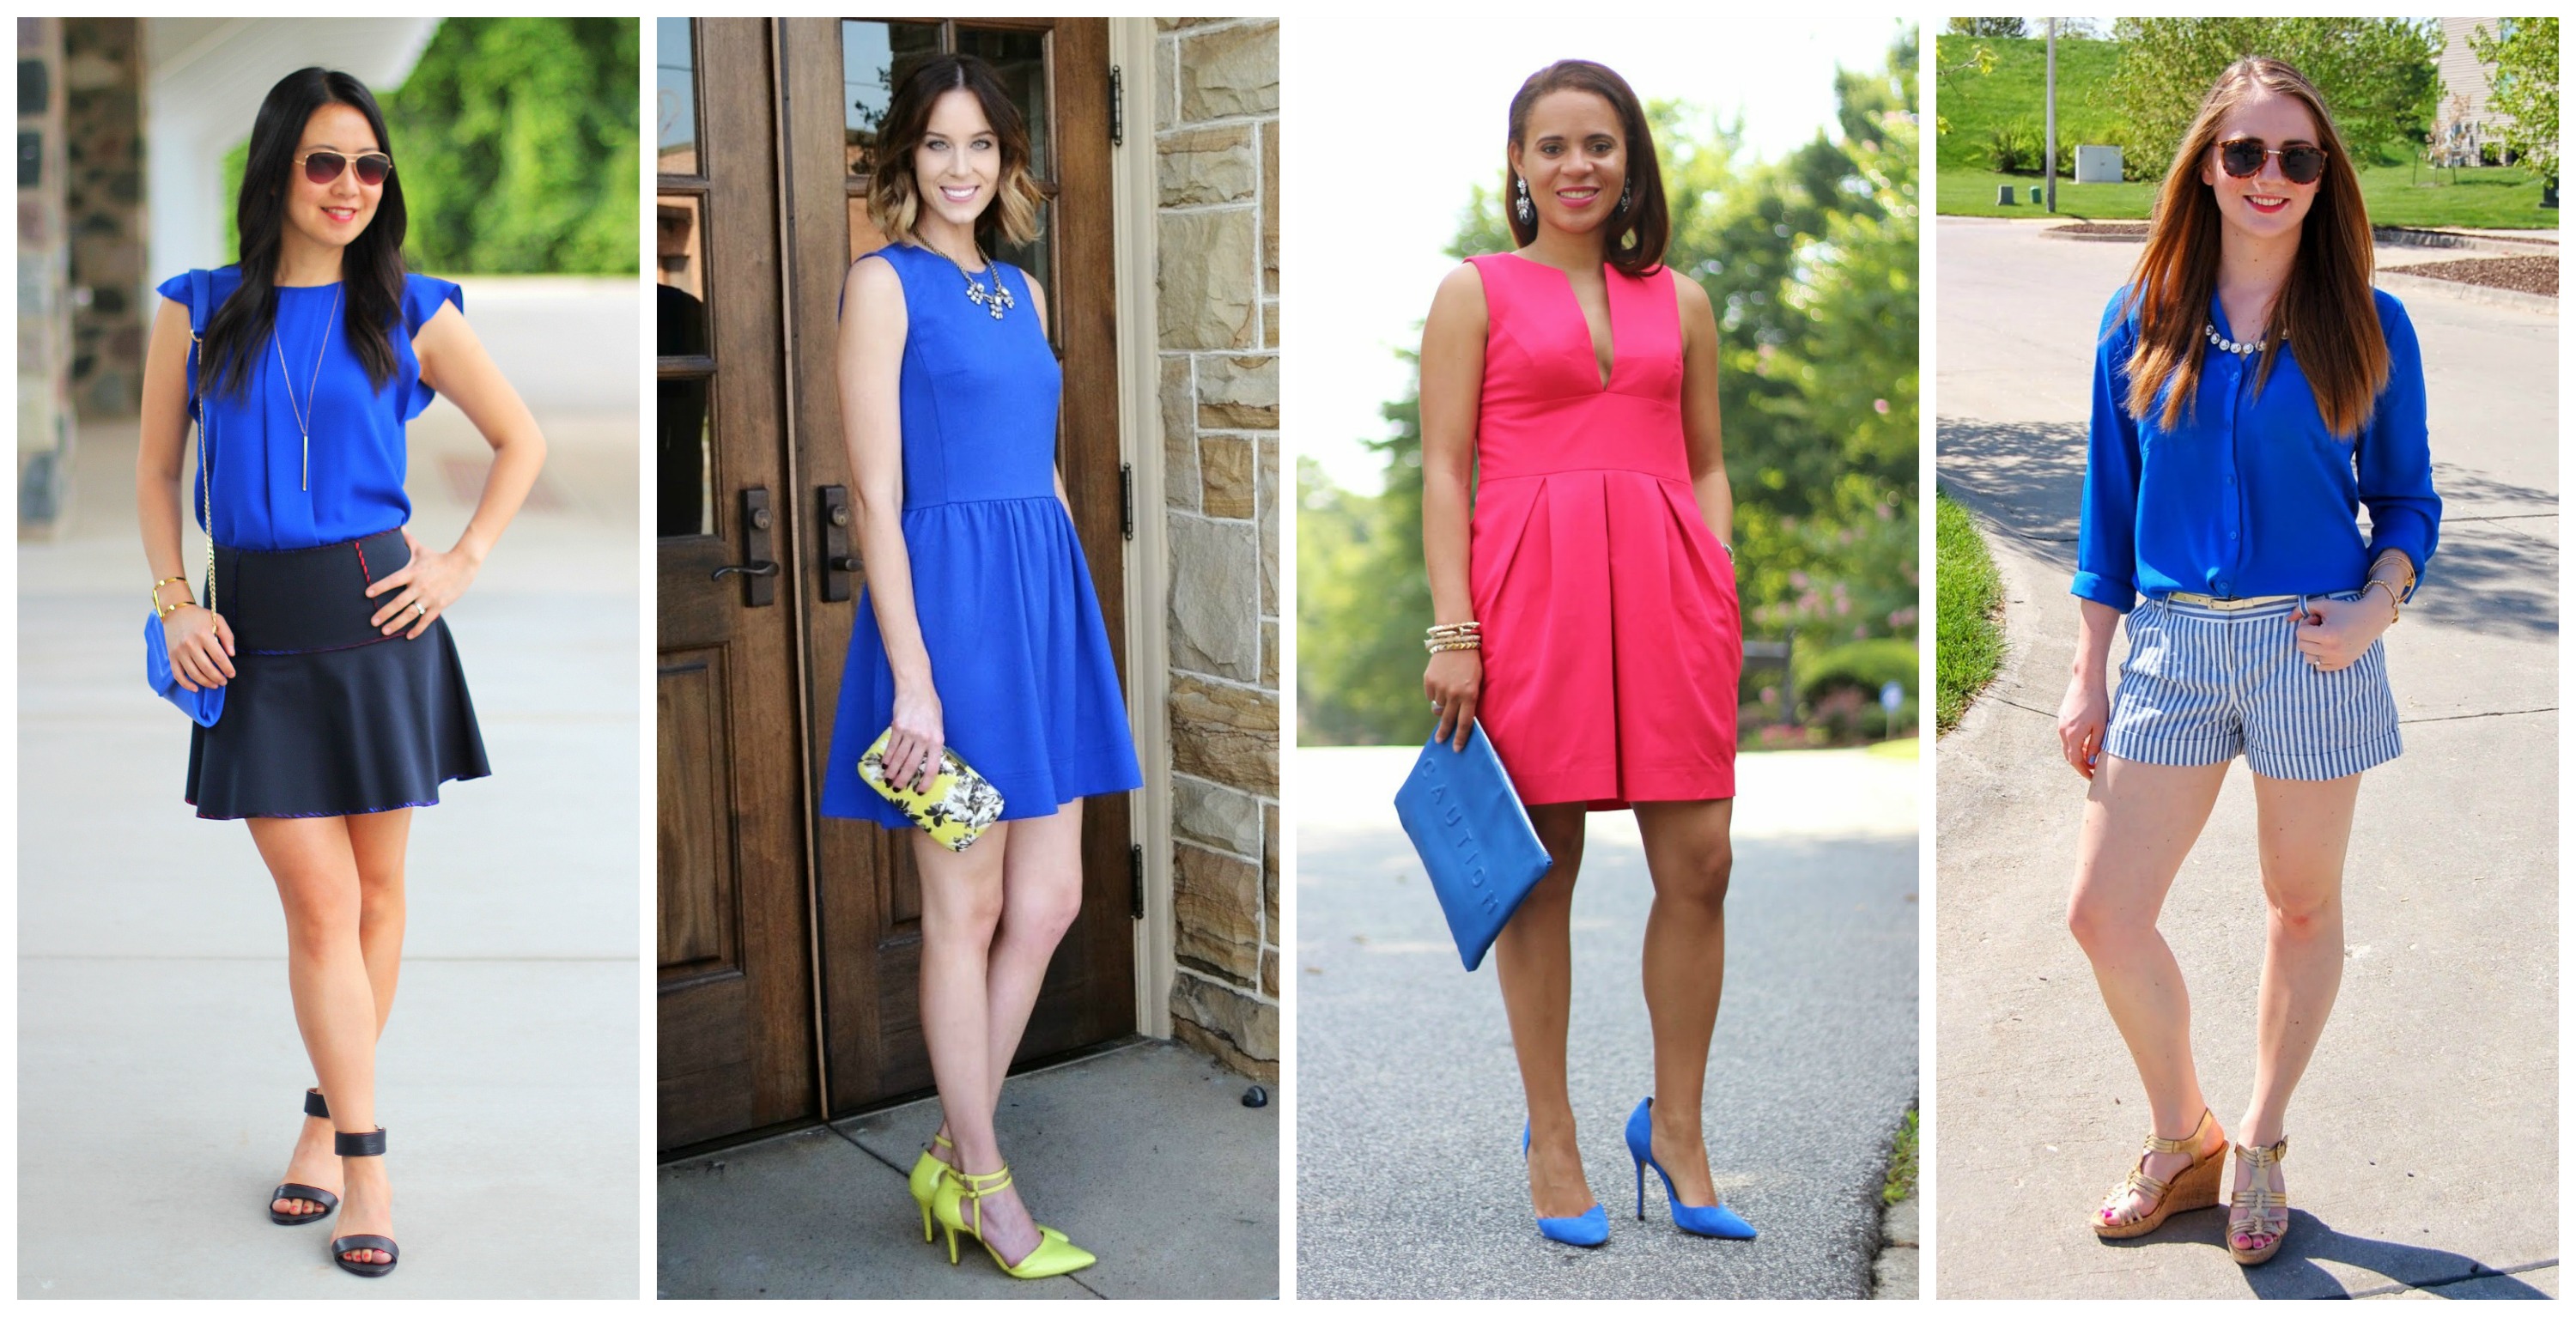 My Top 5 Favorite Summer Colors - My Rose Colored Shades